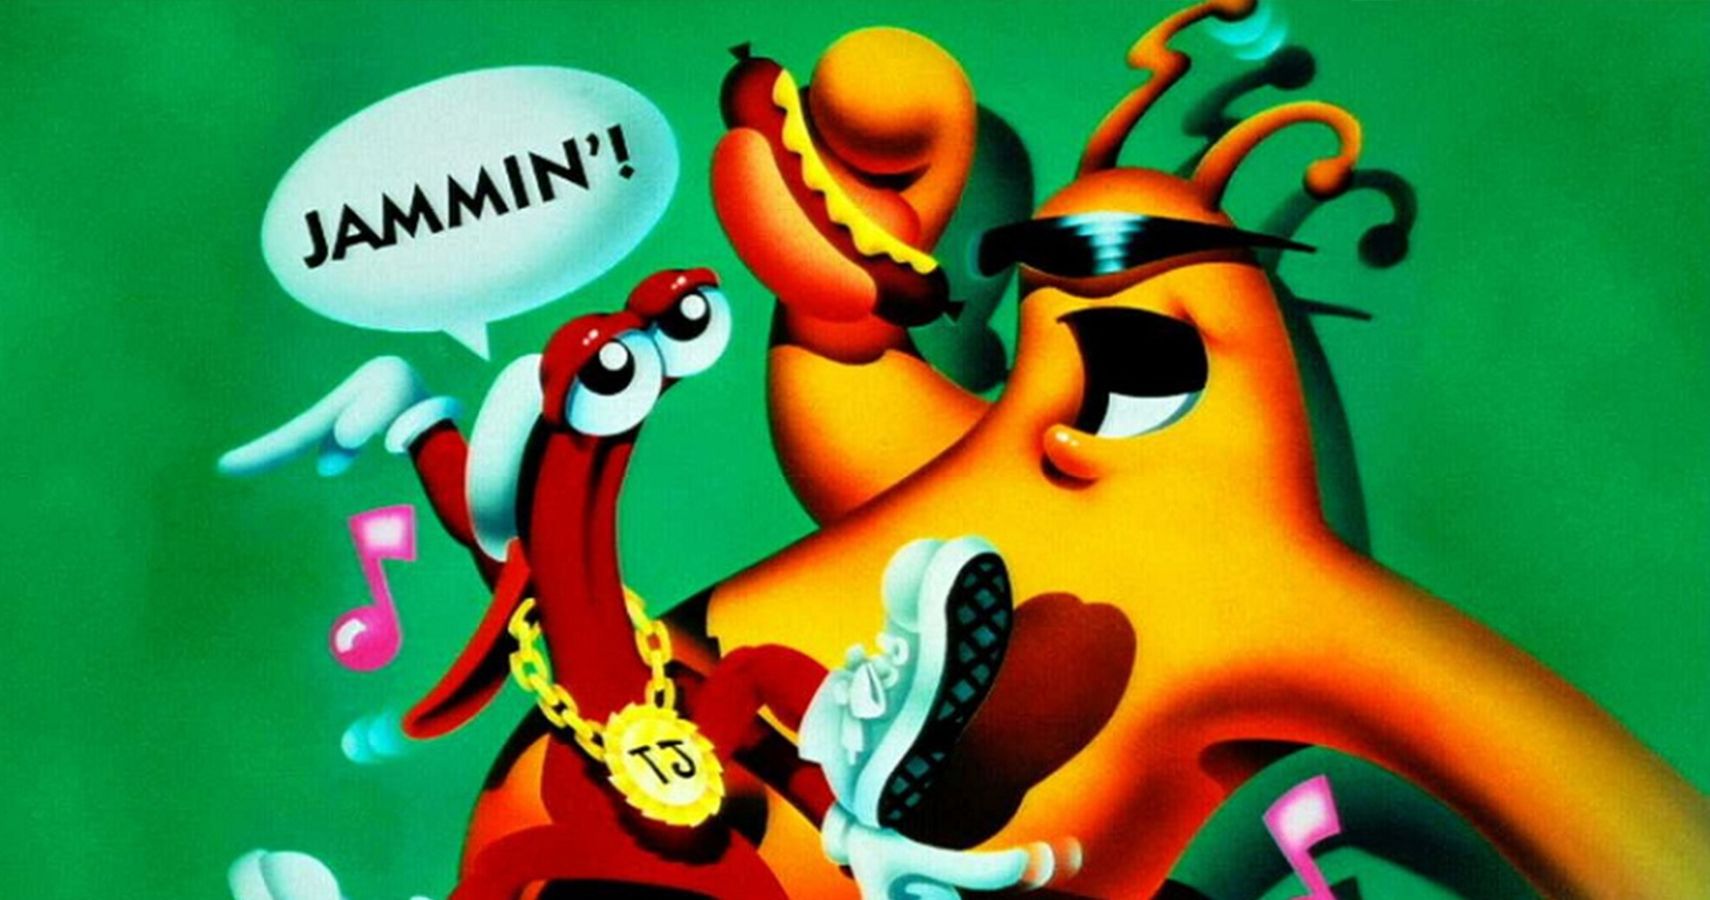 The iconic image from the ToeJam & Earl classic Sega game cover.